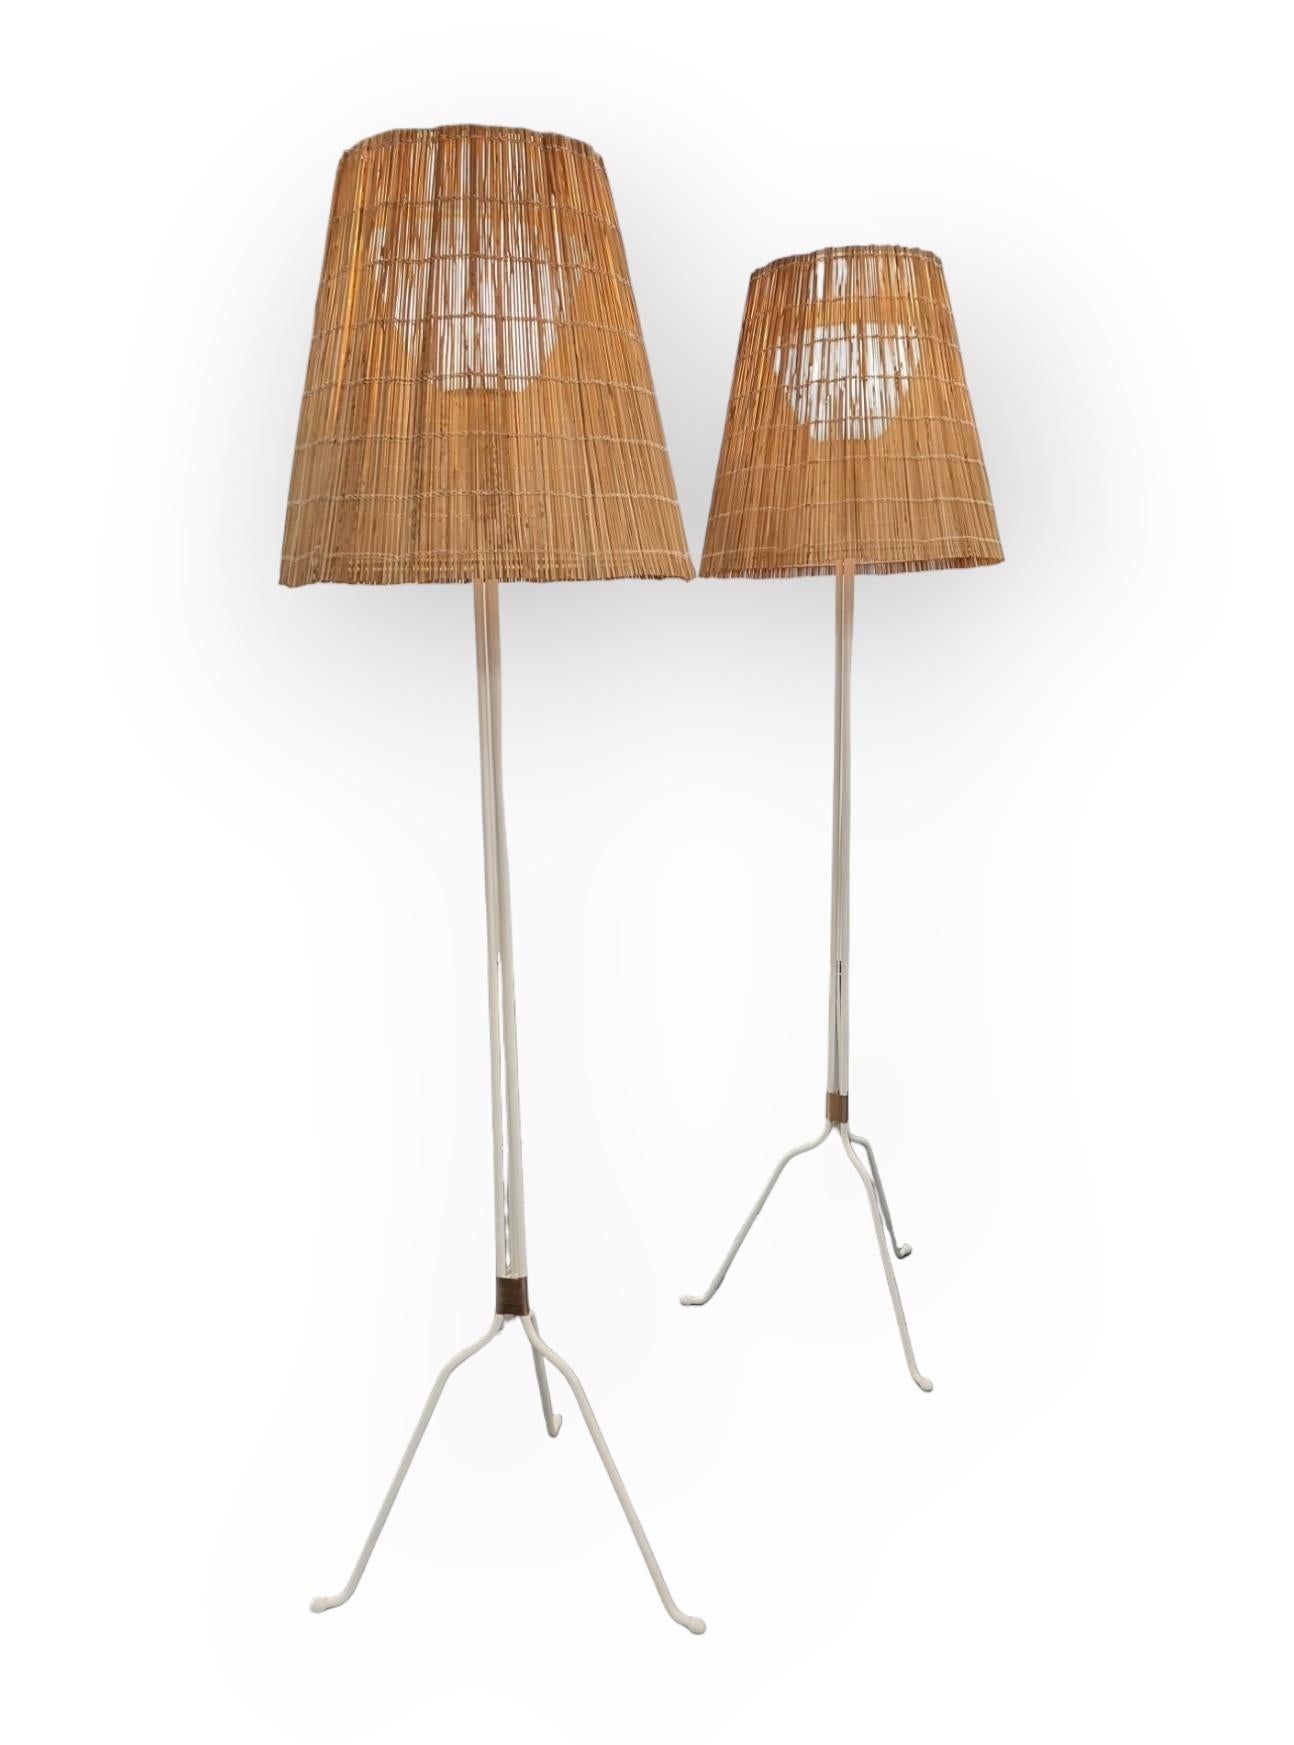 Finnish Pair of Lisa Johansson-Papé floor lamps for Orno, model 30-058, 1950s